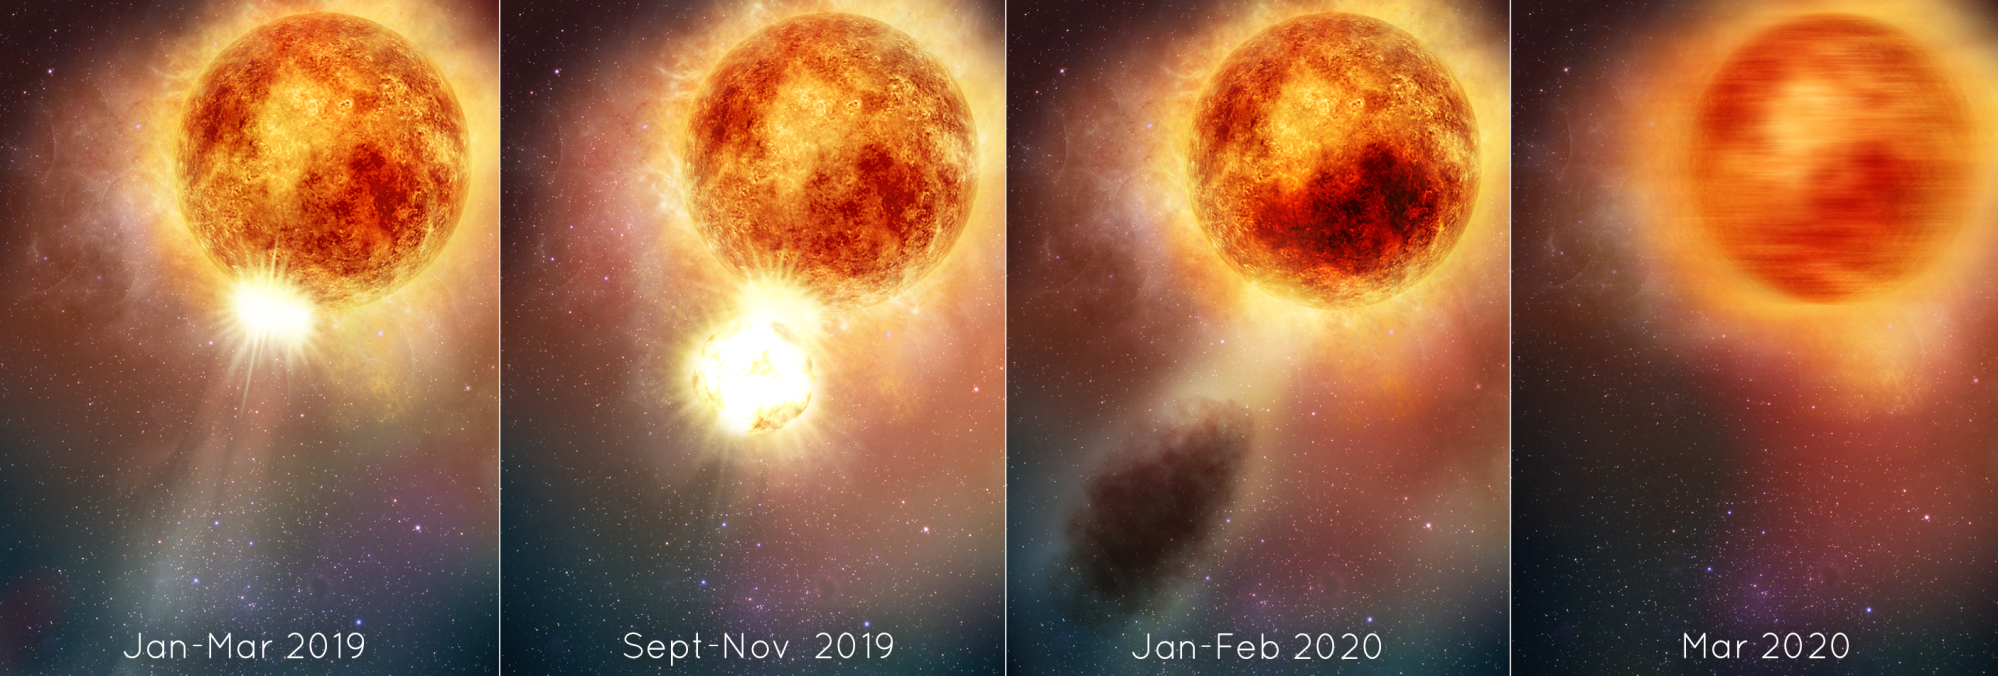 4 illustrations show mass ejecting from the star over time, january 2019 to march 2020.